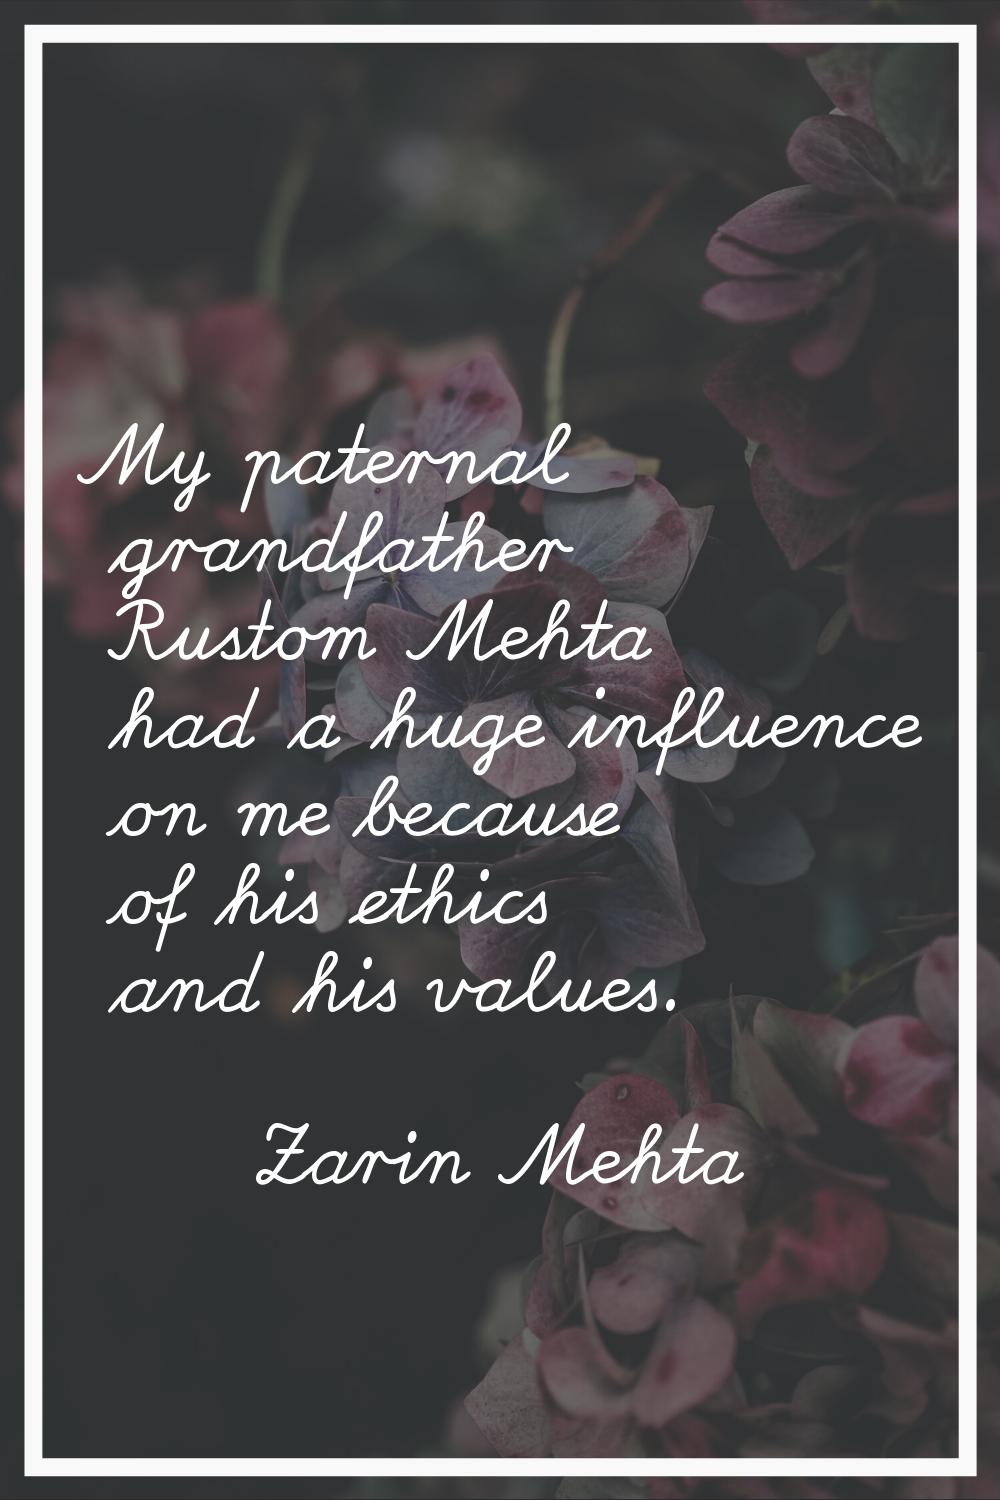 My paternal grandfather Rustom Mehta had a huge influence on me because of his ethics and his value